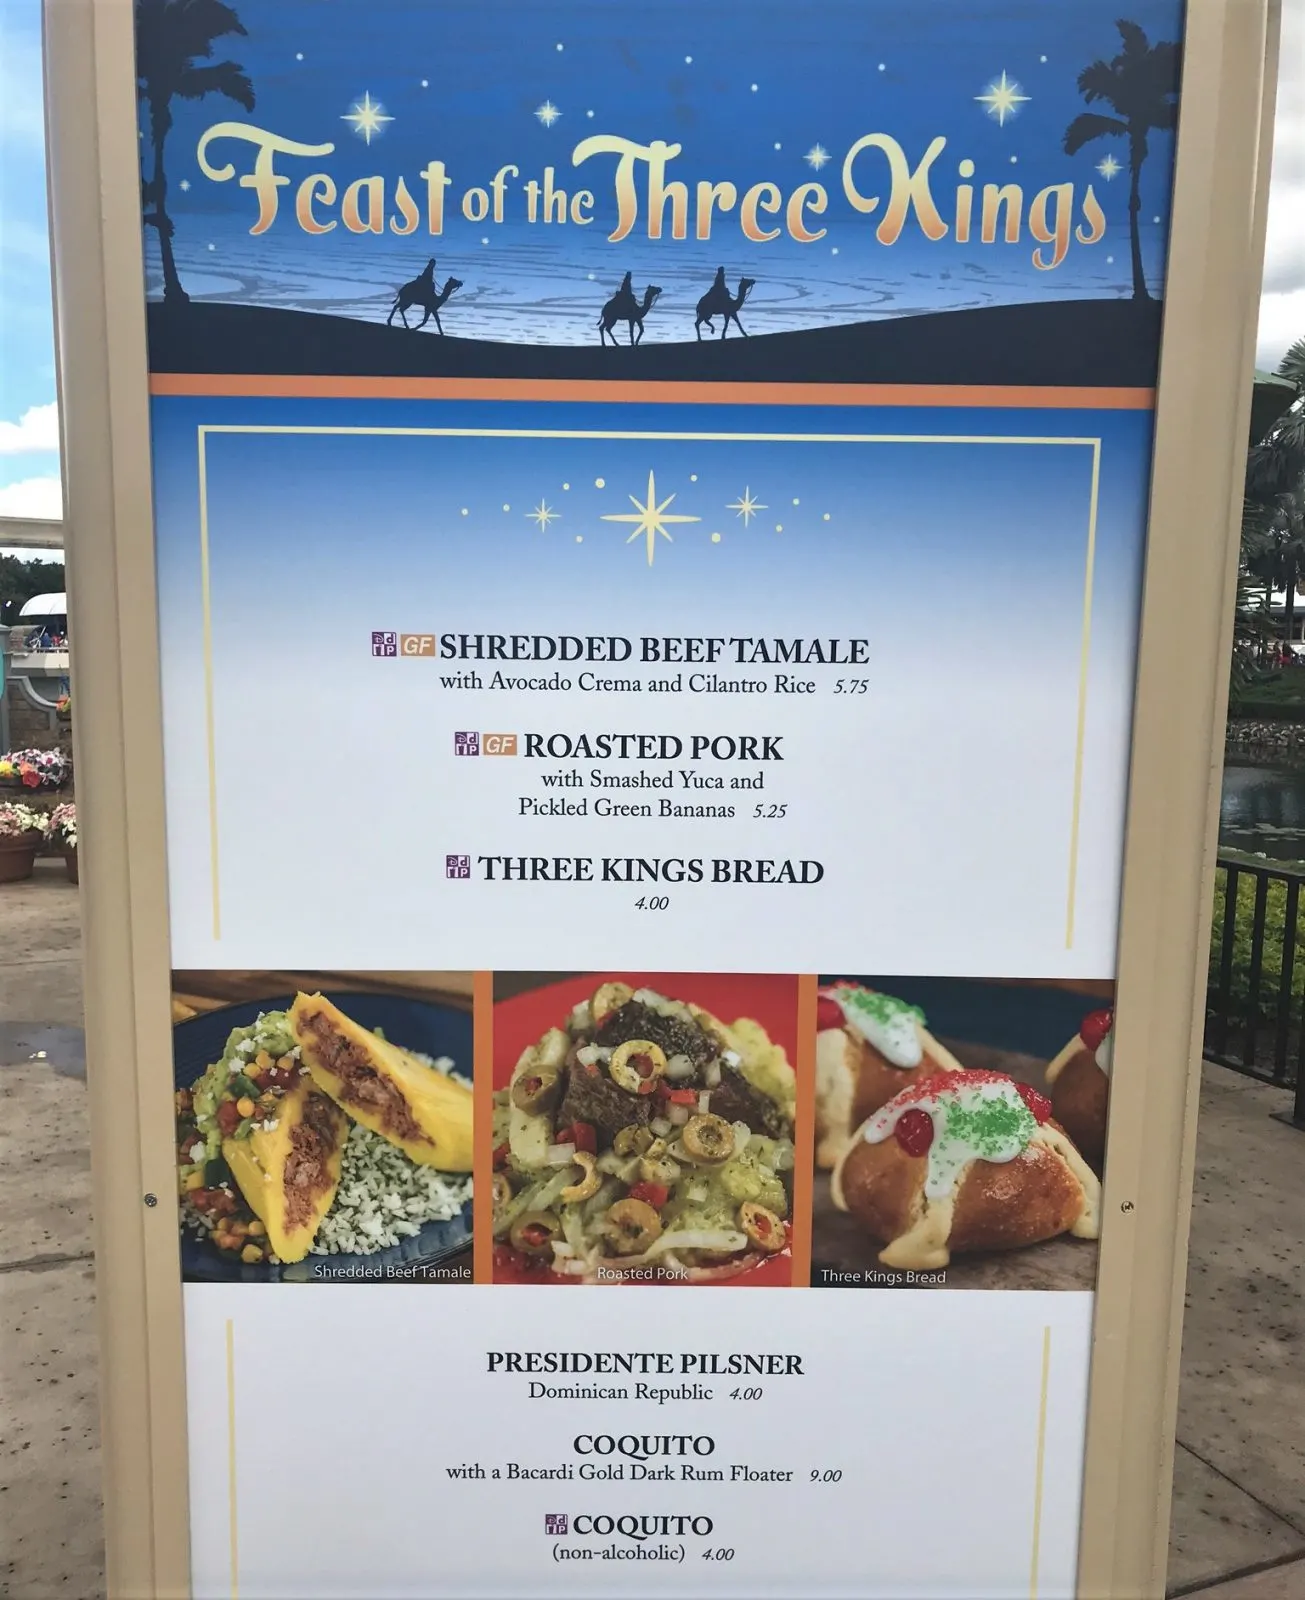 feast of the three kings sign with menu items